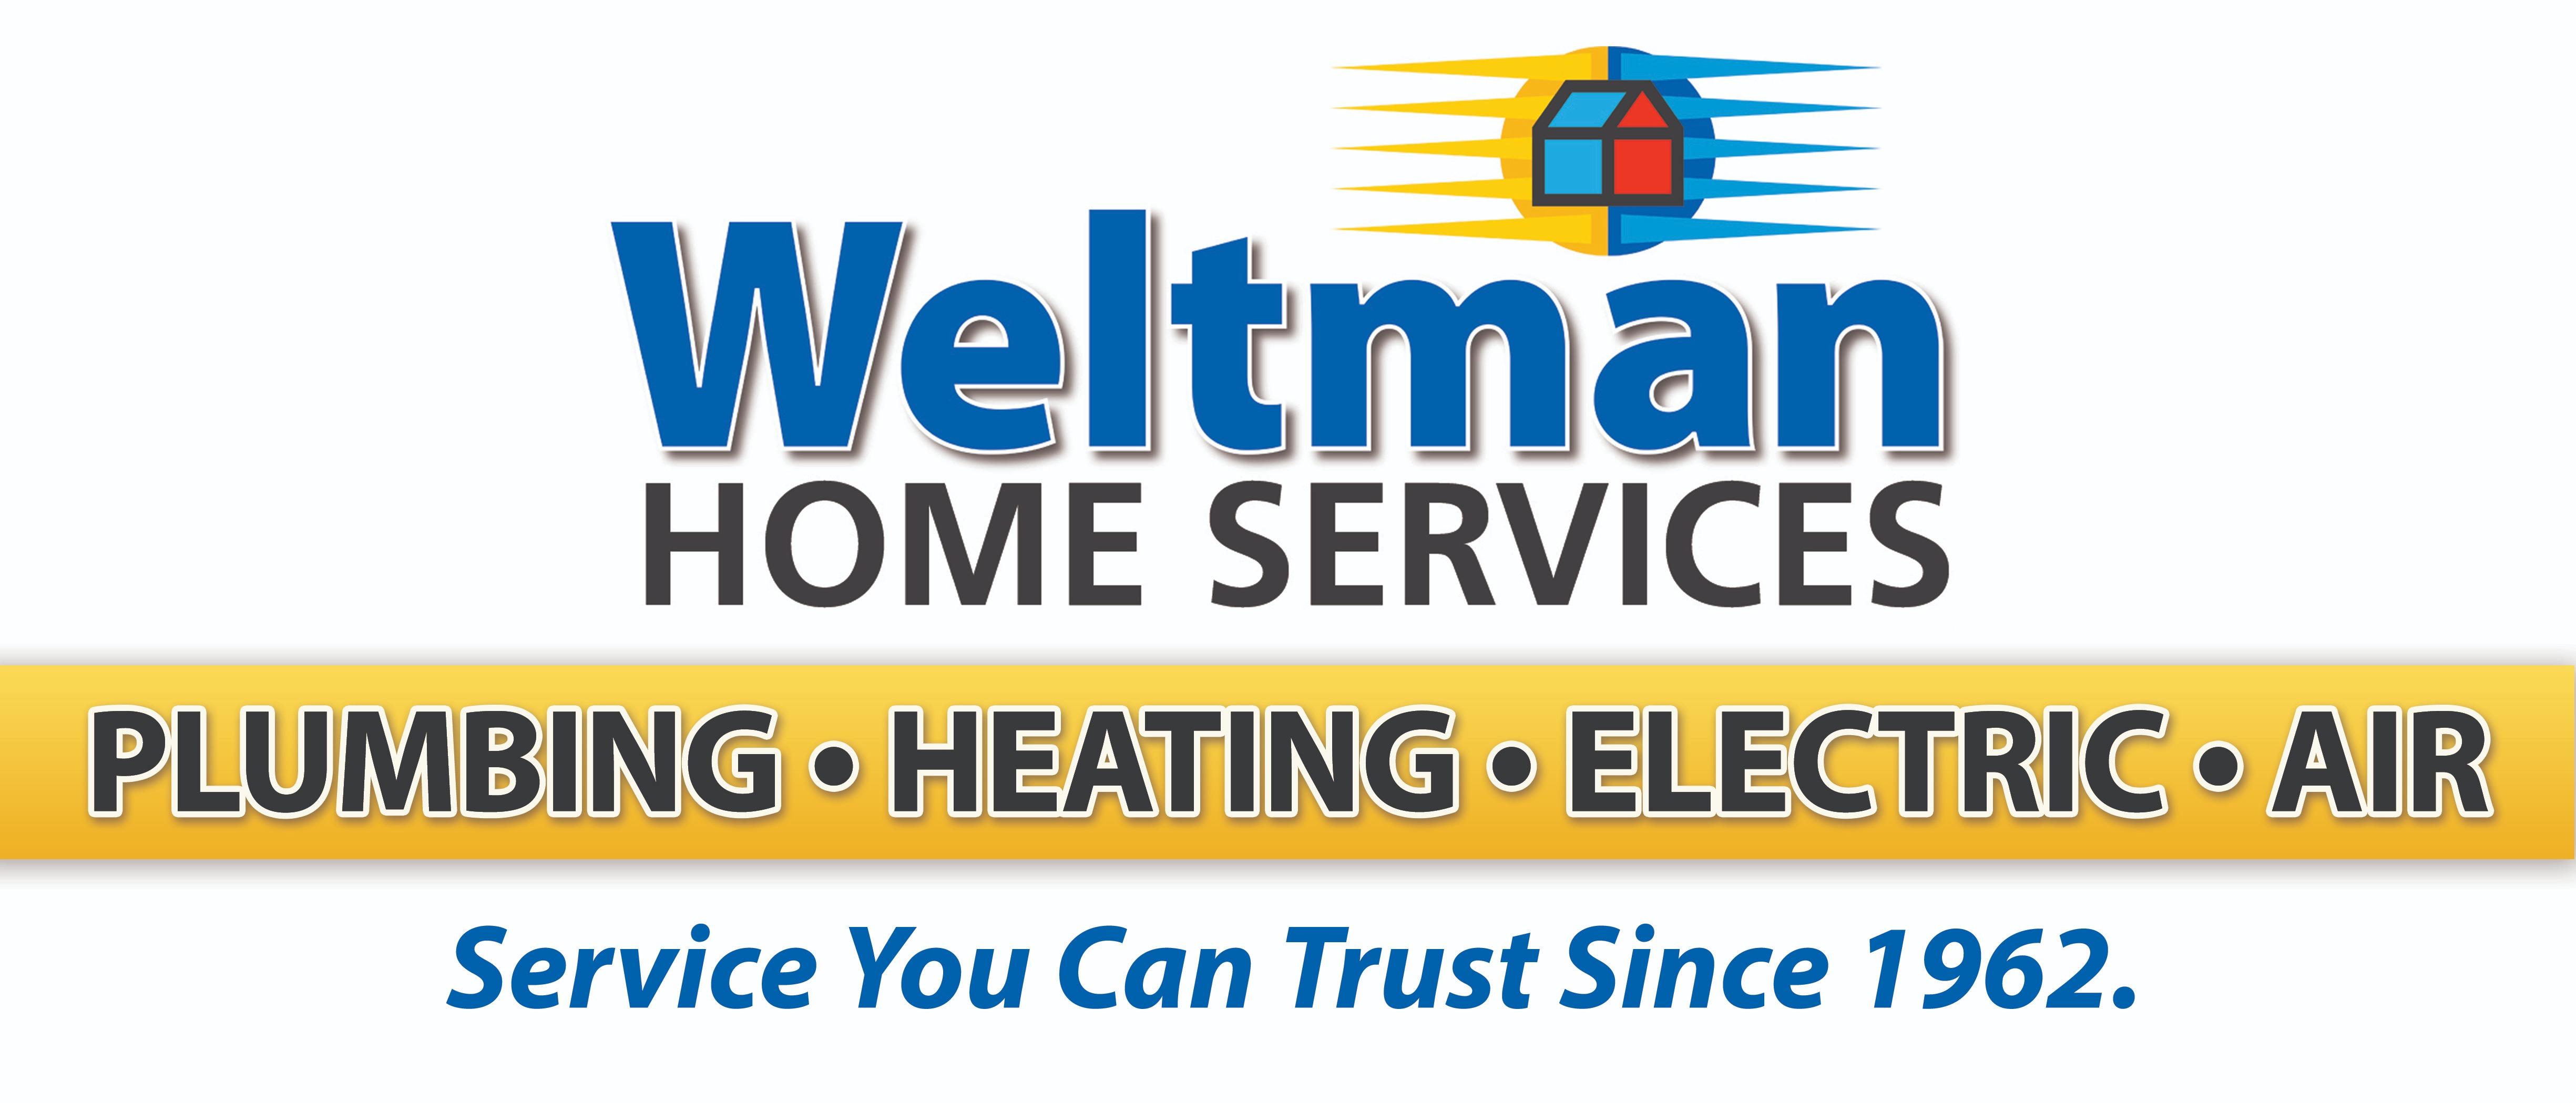 Weltman Home Services Photo